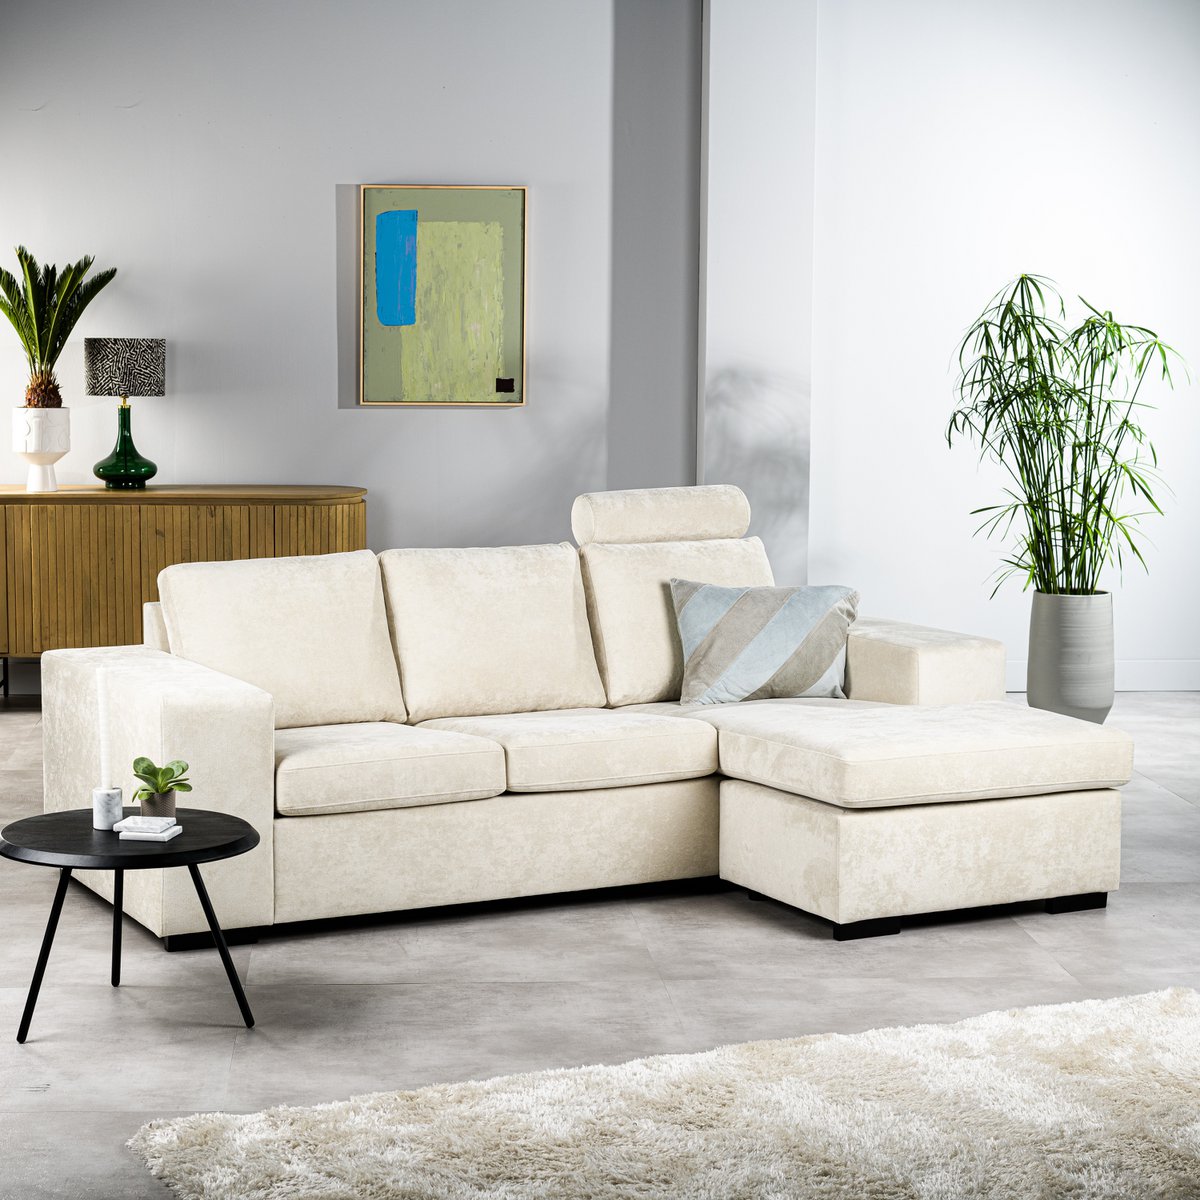 3 seater sofa CL L+R, with headrest, fabric Hotel Chique, H460 beige